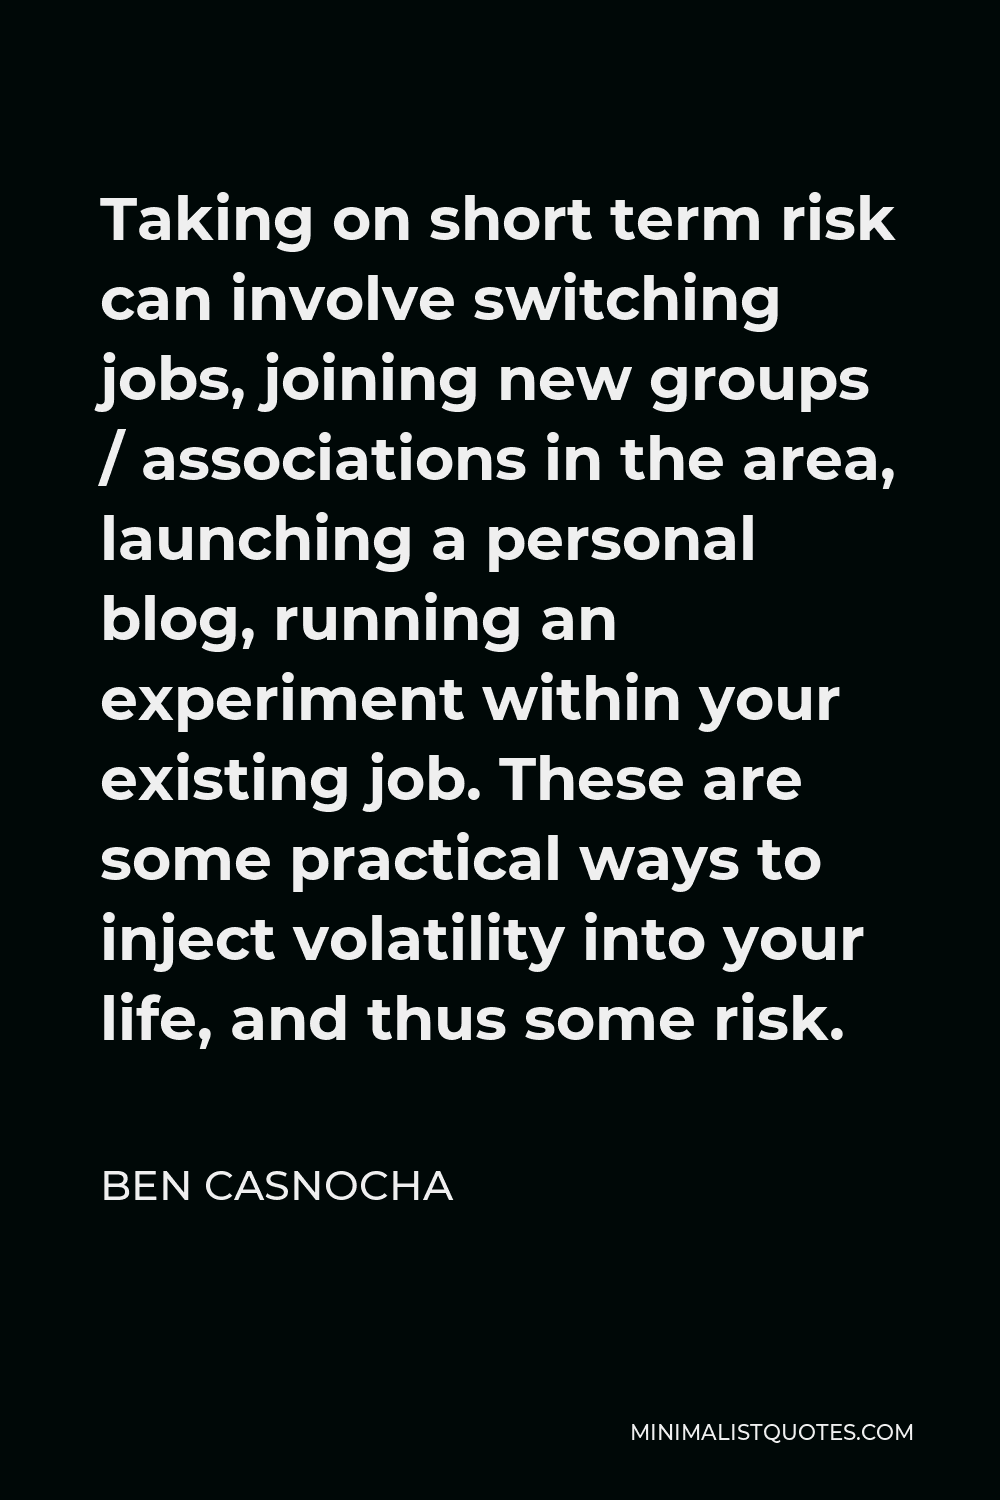 Ben Casnocha Quote - Taking on short term risk can involve switching jobs, joining new groups / associations in the area, launching a personal blog, running an experiment within your existing job. These are some practical ways to inject volatility into your life, and thus some risk.